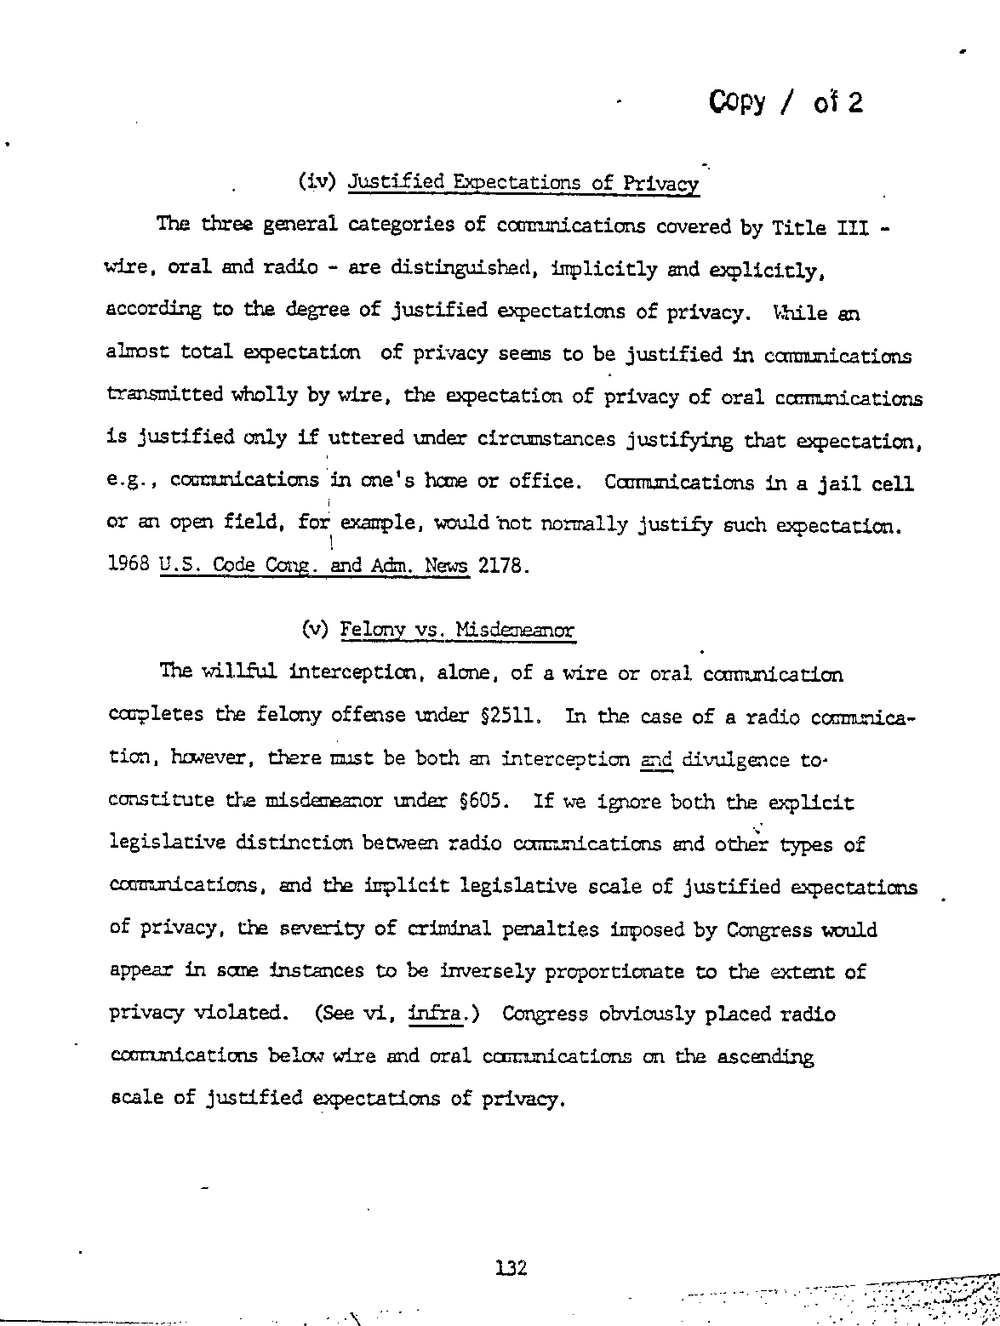 Page 140 from Report on Inquiry Into CIA Related Electronic Surveillance Activities